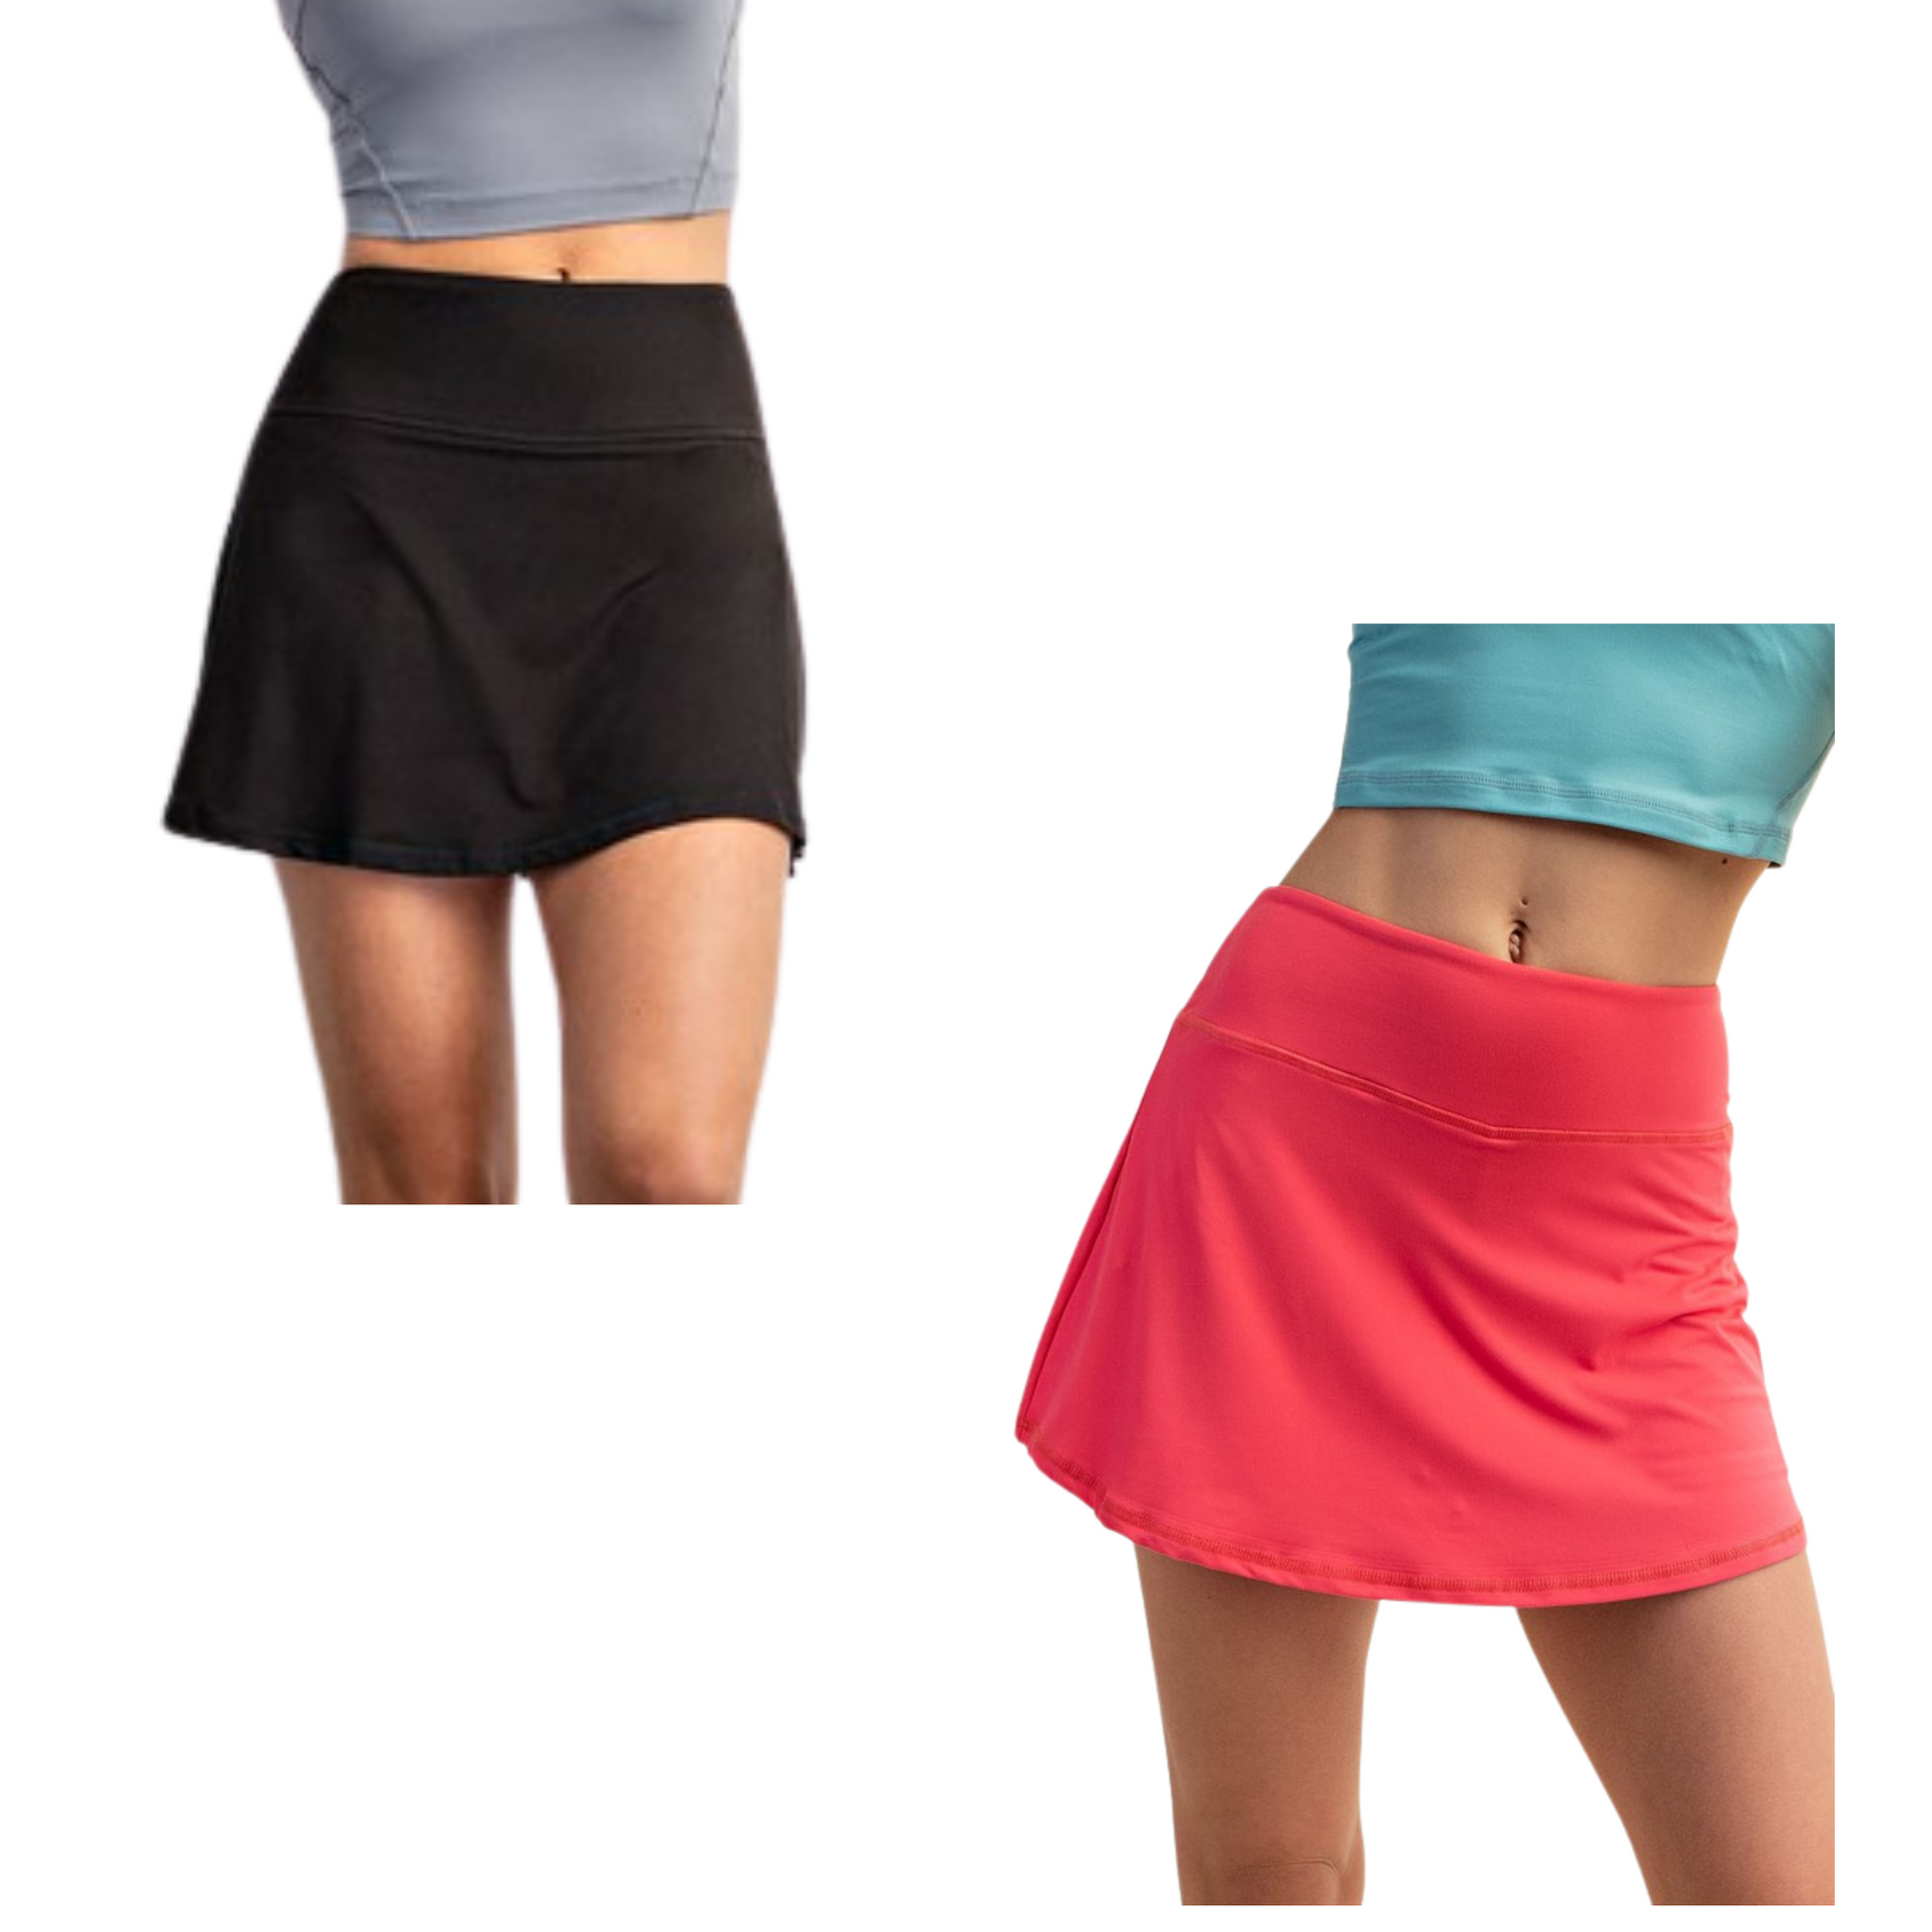 The Butter Skort is designed for maximum comfort and style. Made with butter soft fabric and a high-waist design, this 2 in 1 skort is perfect for casual everyday wear, or for your active and athleisure needs. Available in black or flamingo pink.